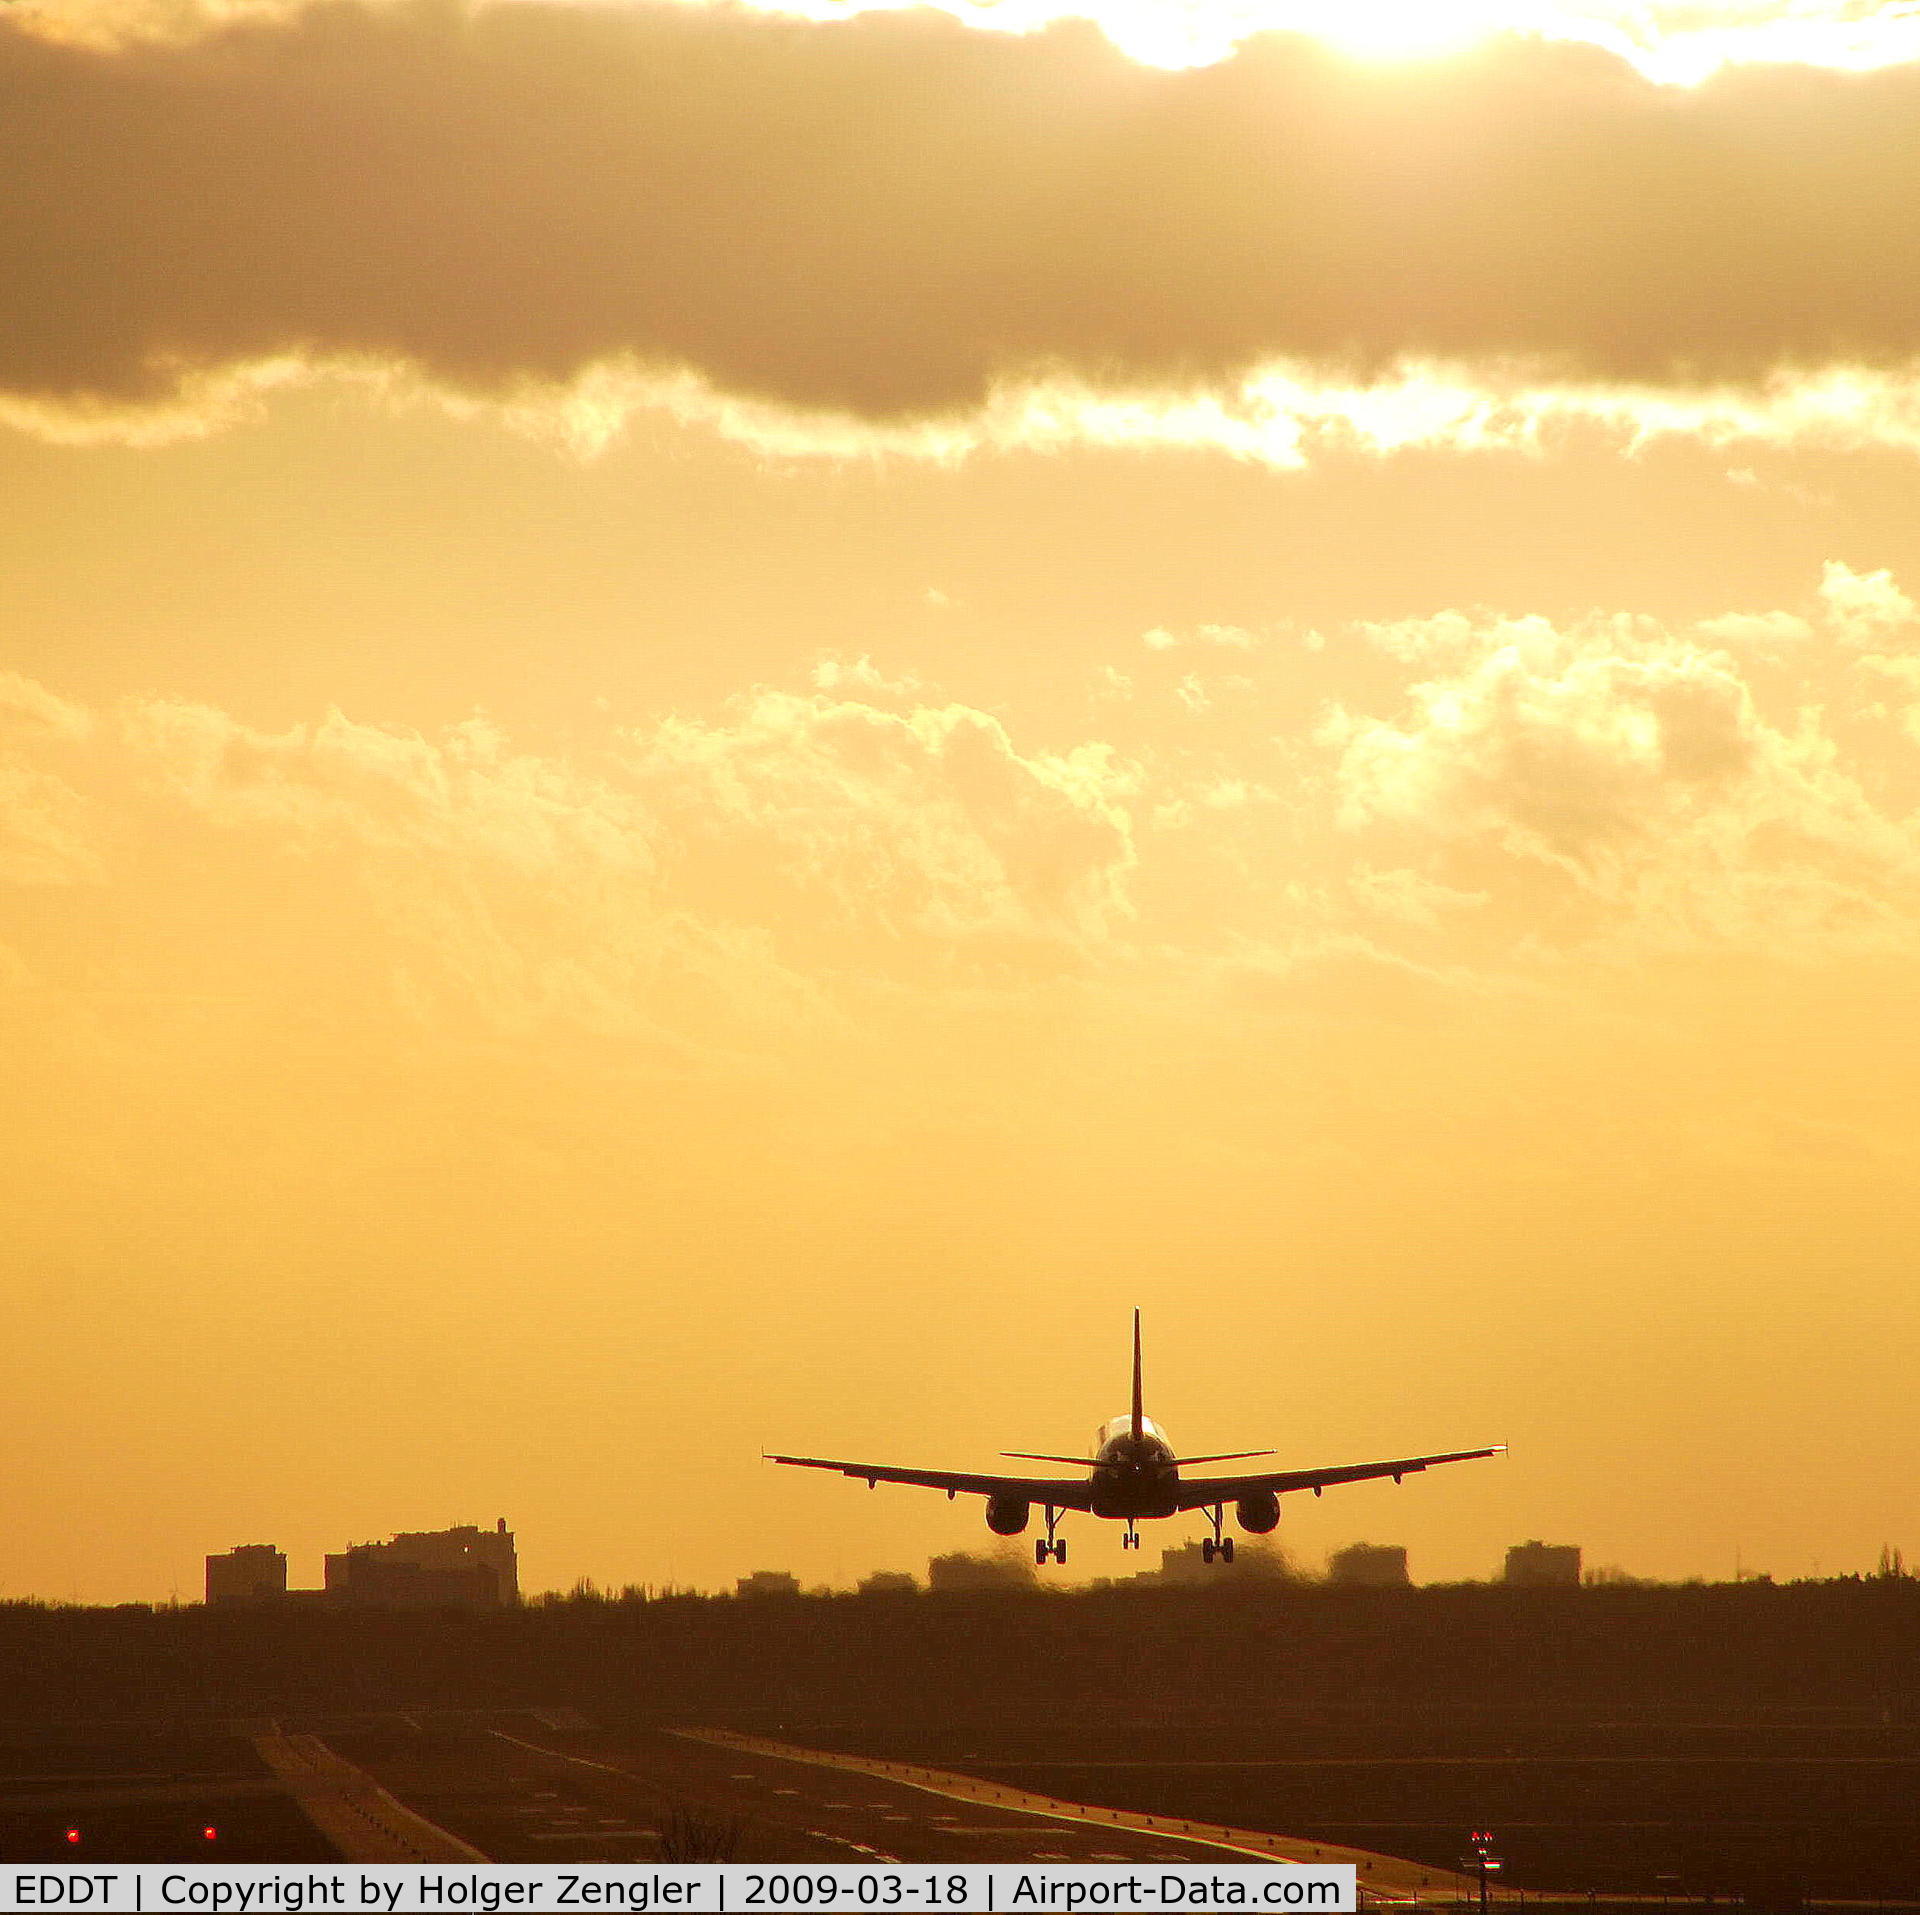 Tegel International Airport (closing in 2011), Berlin Germany (EDDT) - Touch down in dusty afternoon light